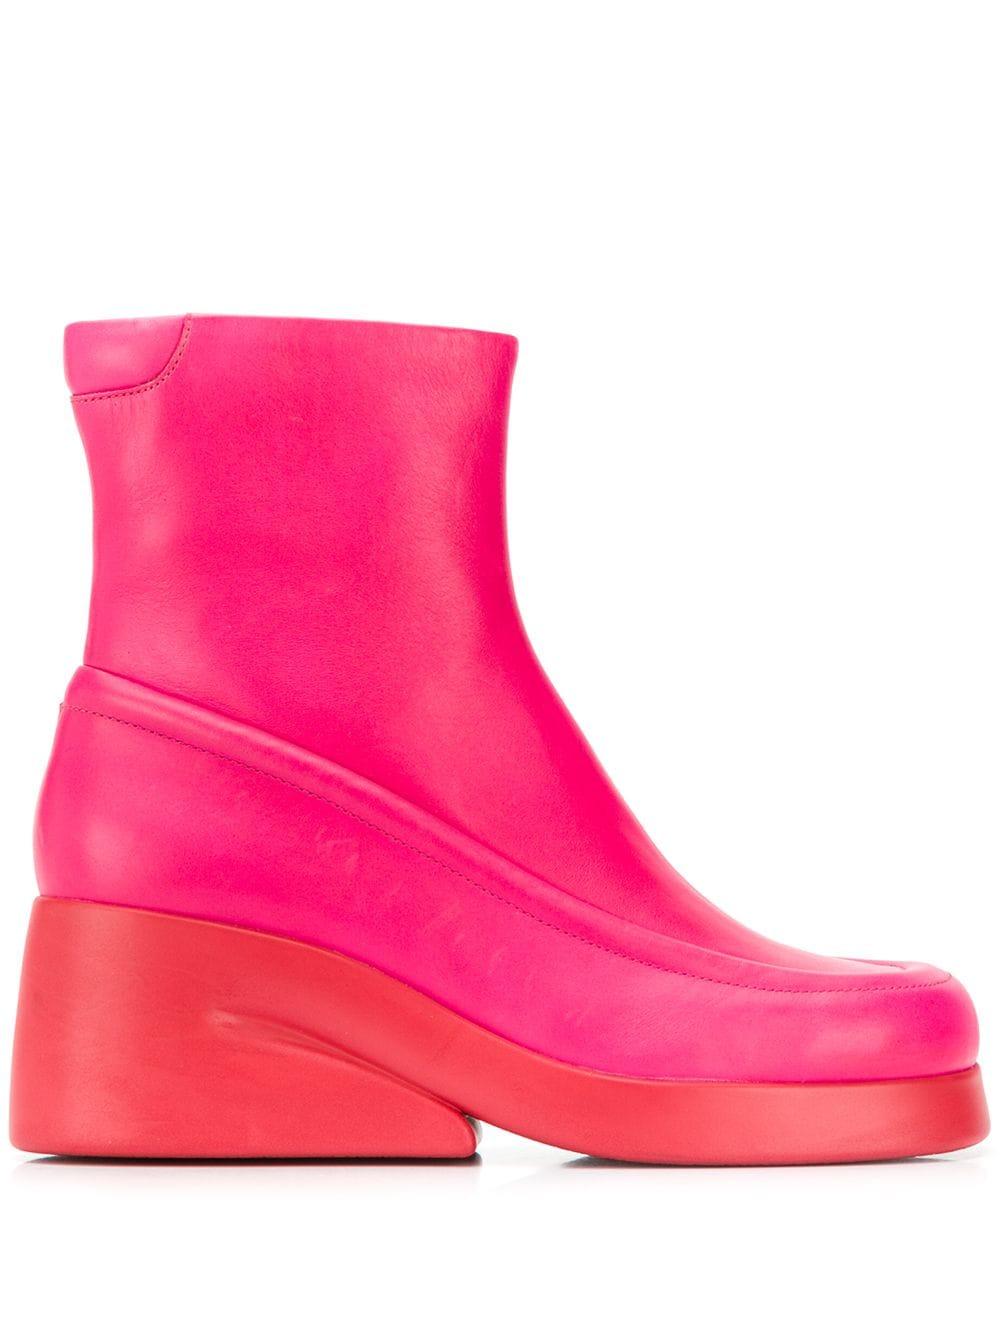 Camper Kaah Boots in Pink | Lyst Australia